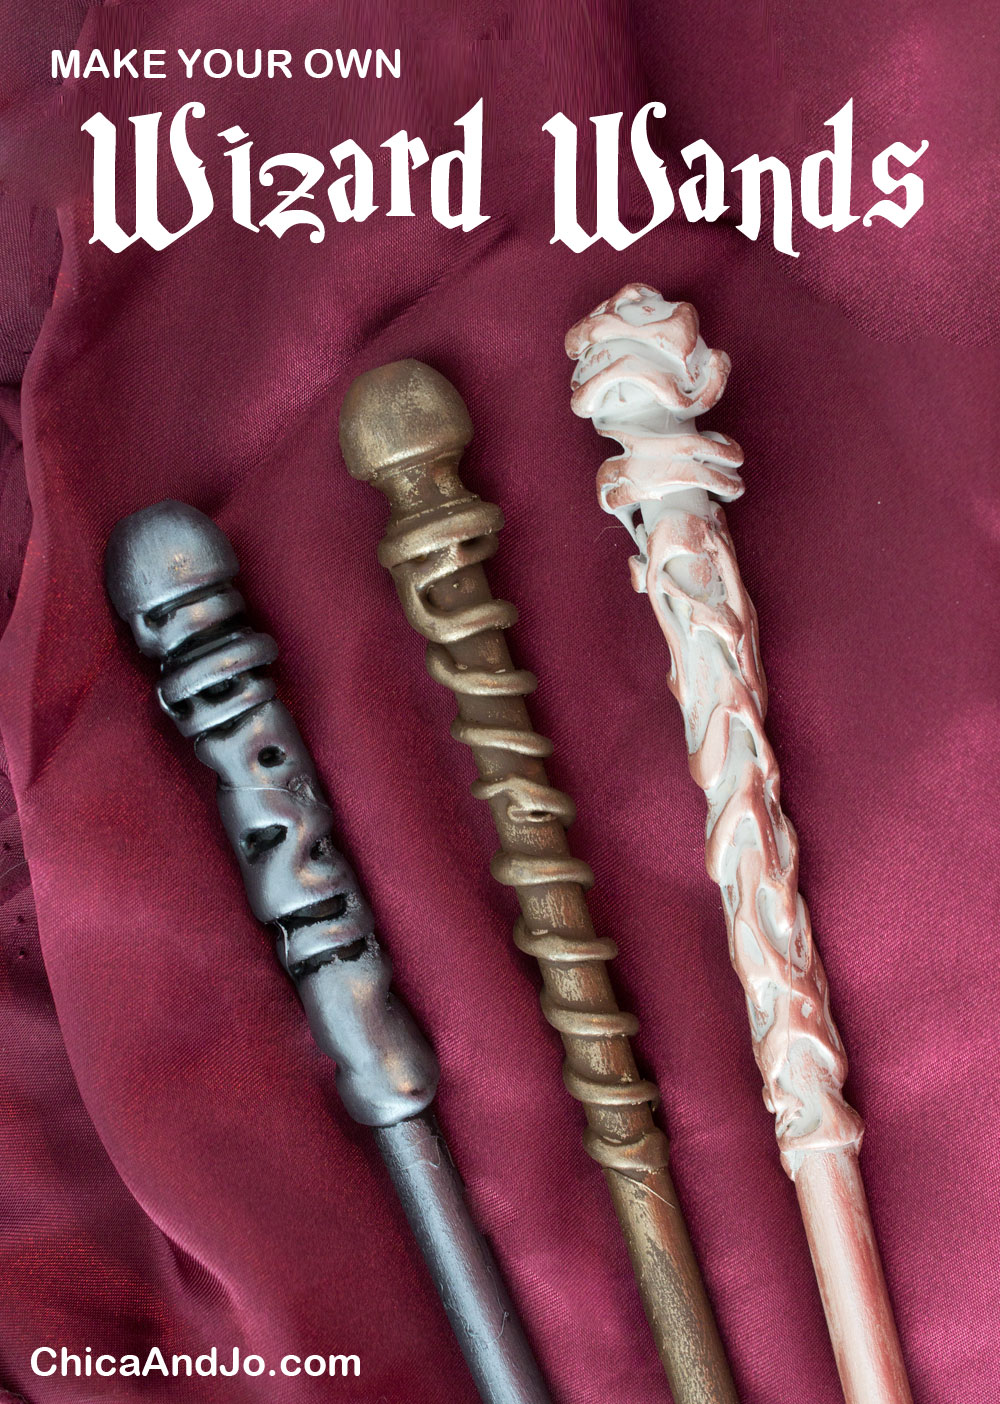 DIY magic wizard wands Chica and Jo